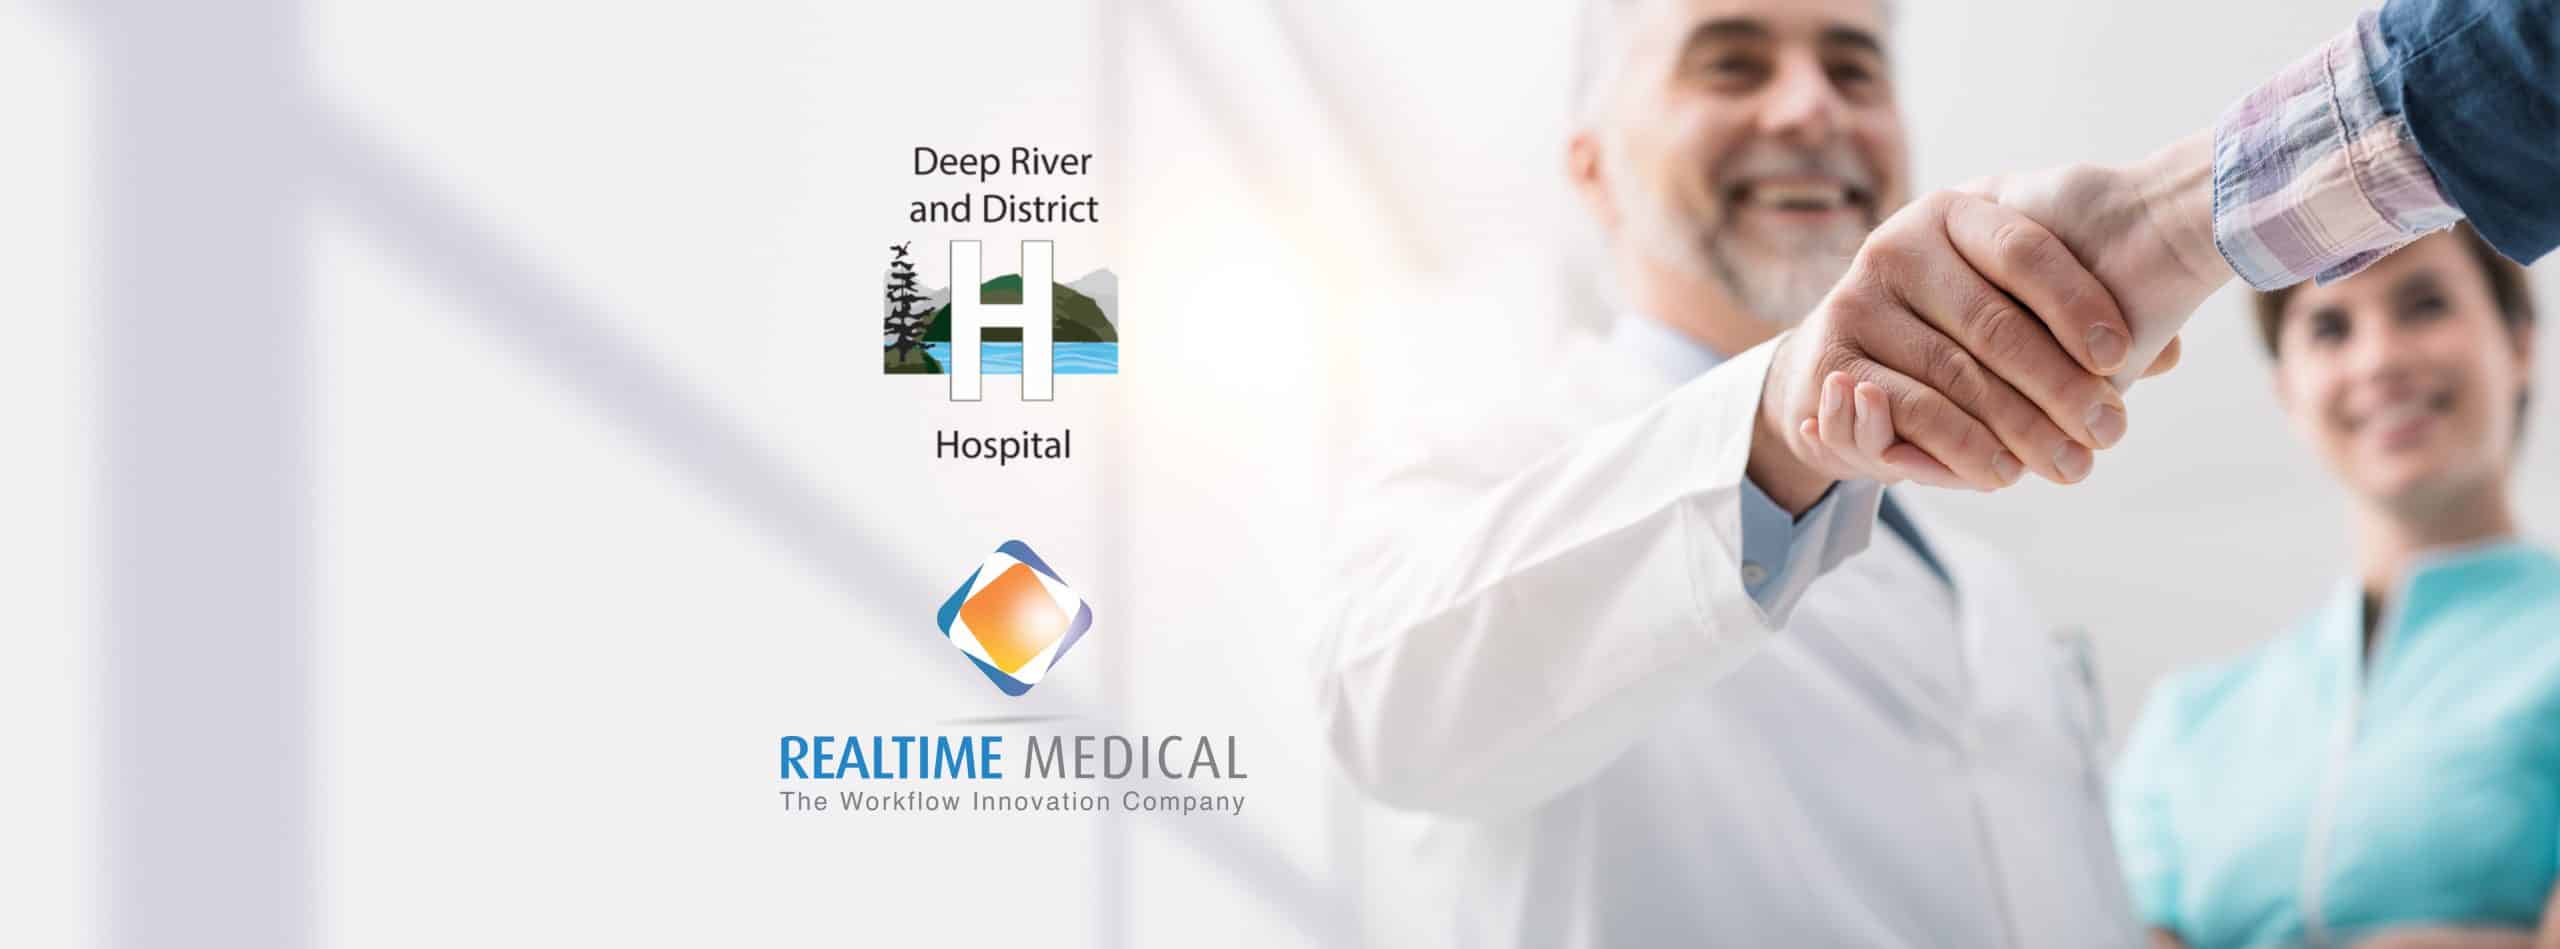 The Deep River and District Hospital shared updates in the November 2021 Newsletter The Zinger. Real Time Medical's platform now supports their radiology department.